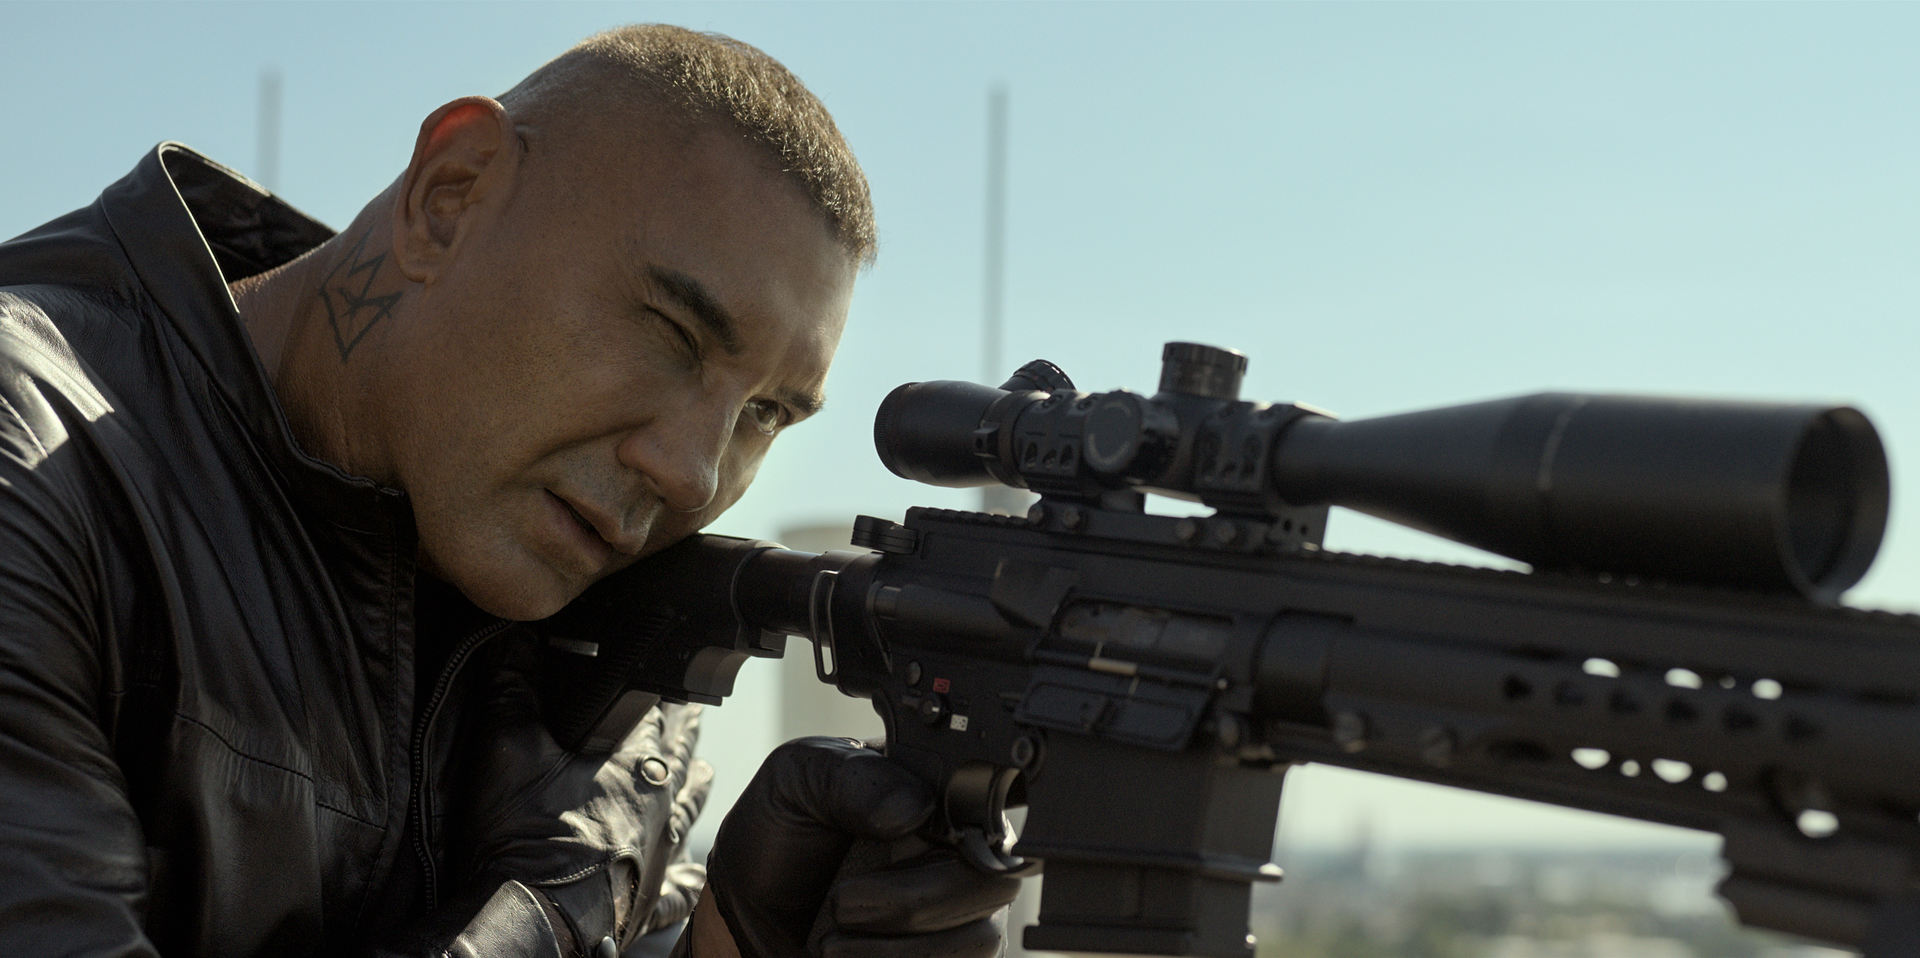 Dave Bautista peers down a sniper rifle in The Killer’s Game